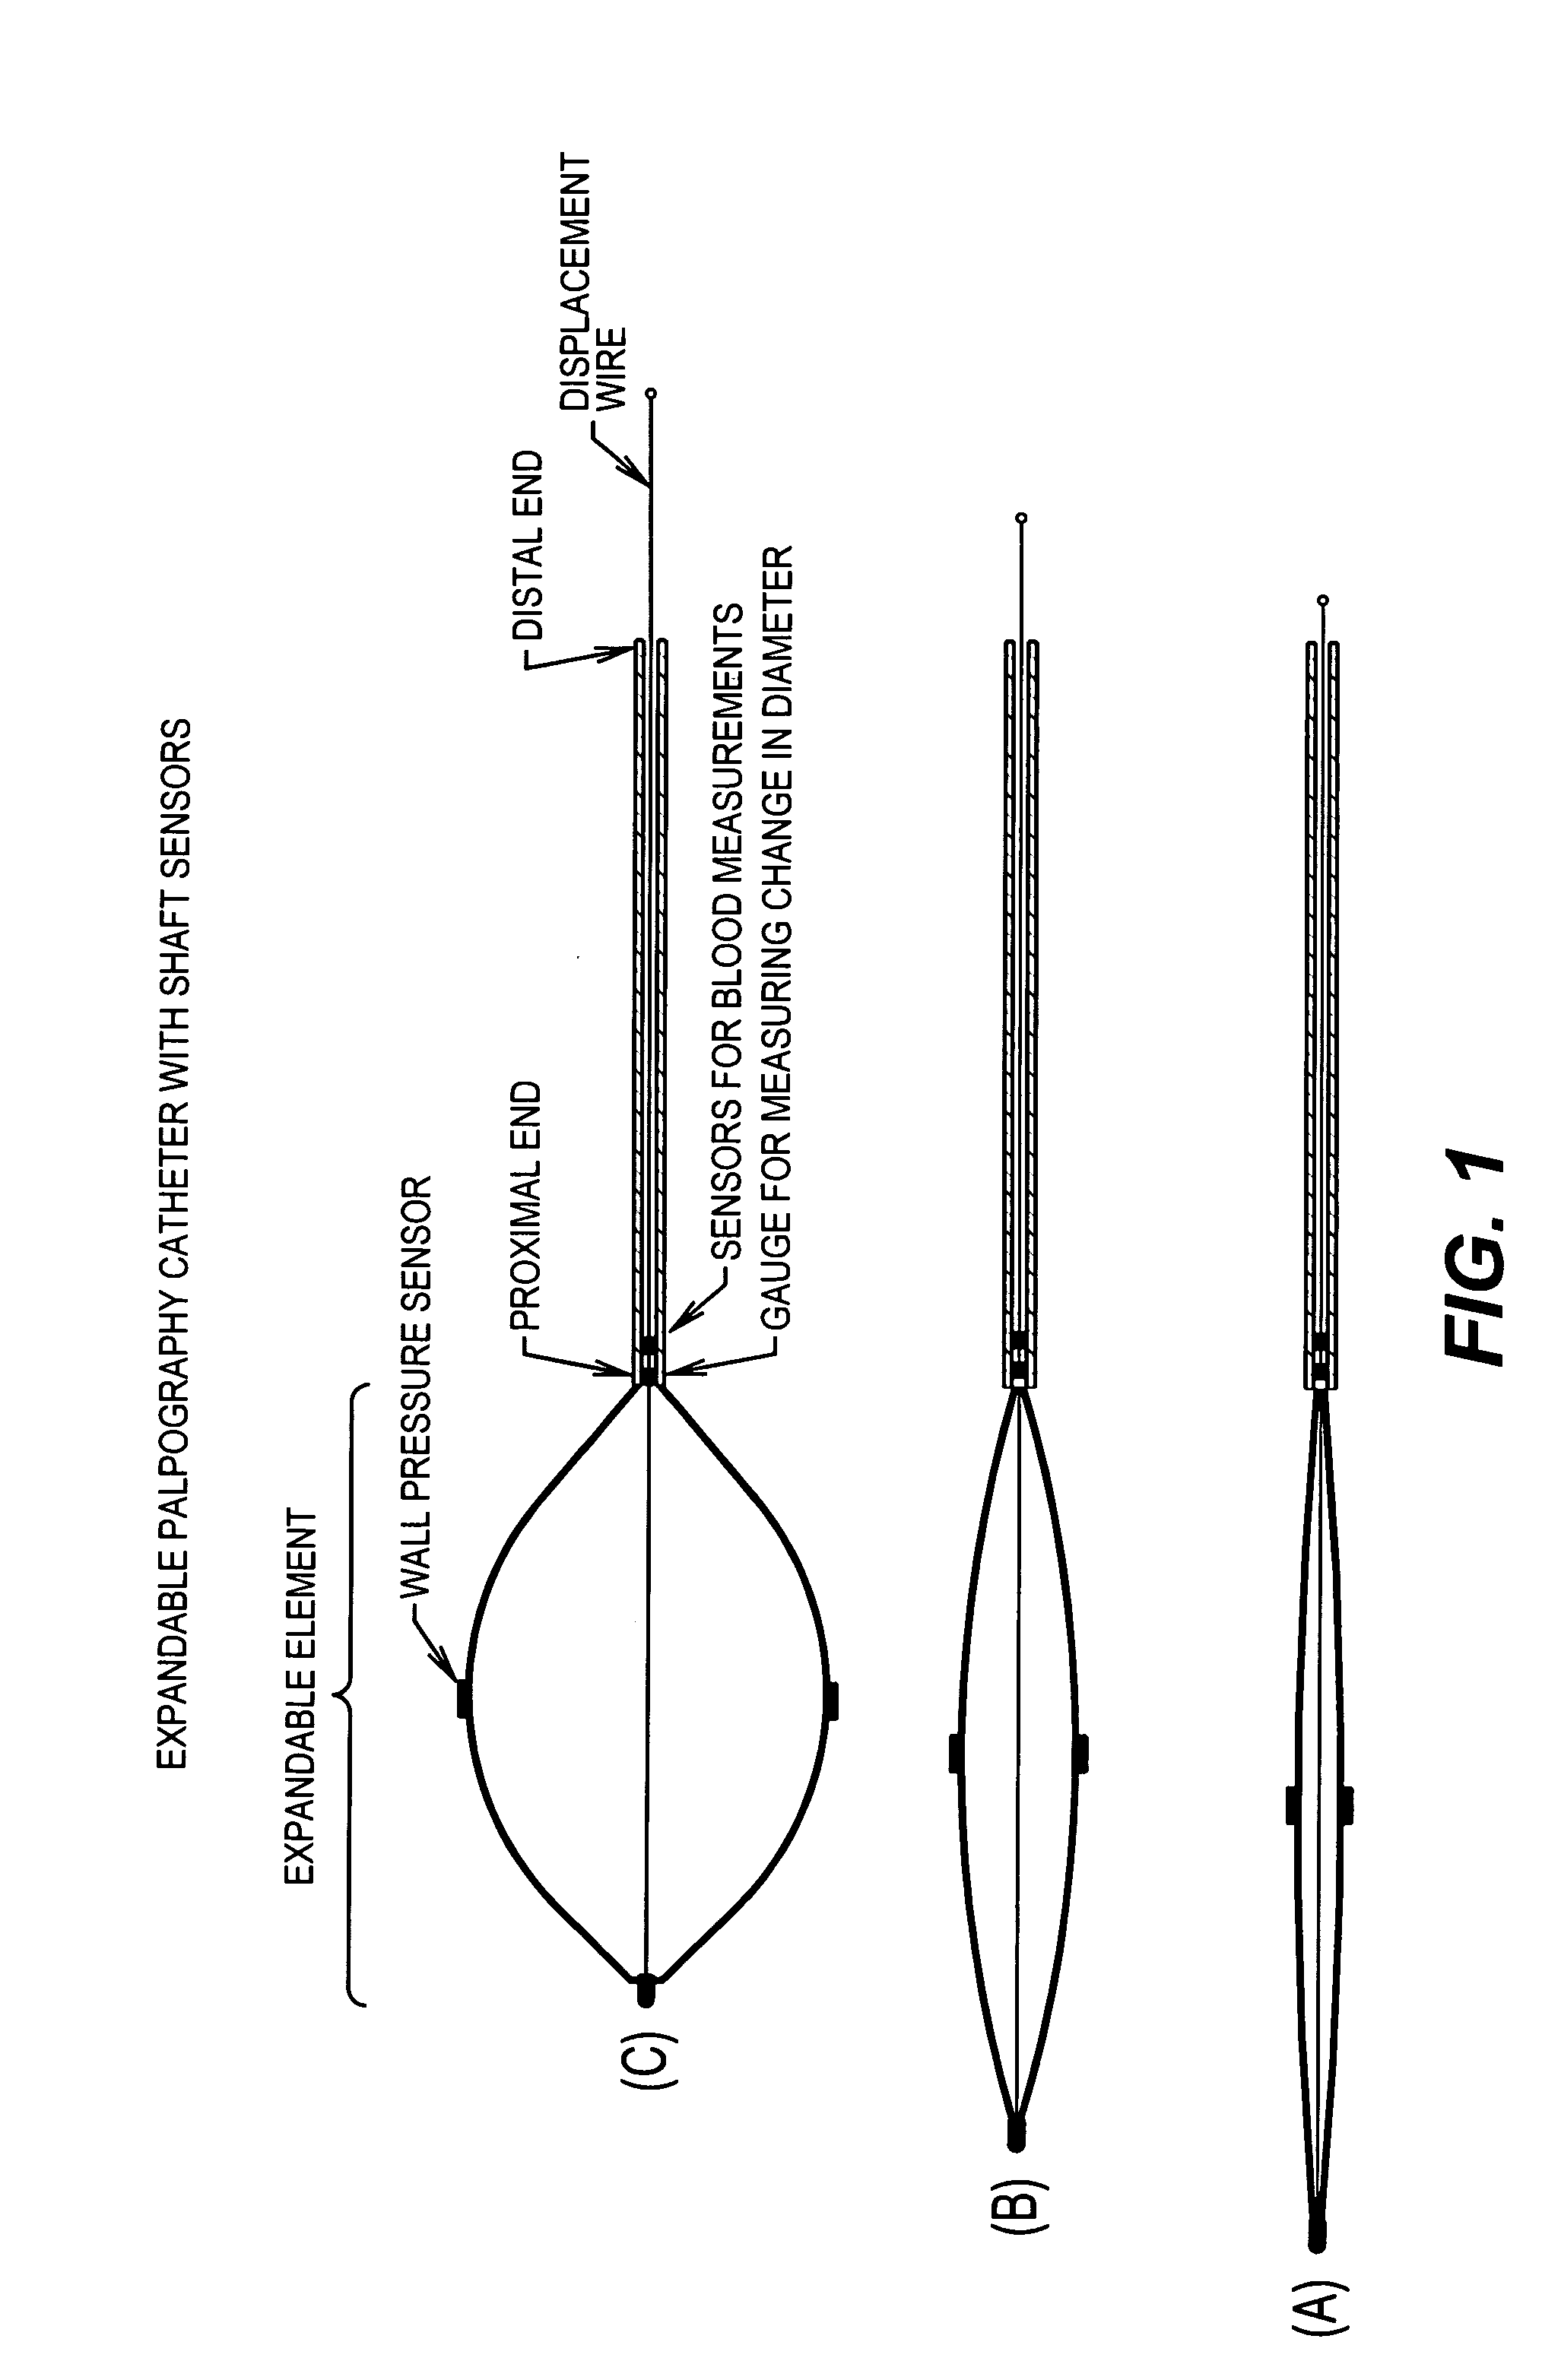 Apparatus and method for palpographic characterization of vulnerable plaque and other biological tissue